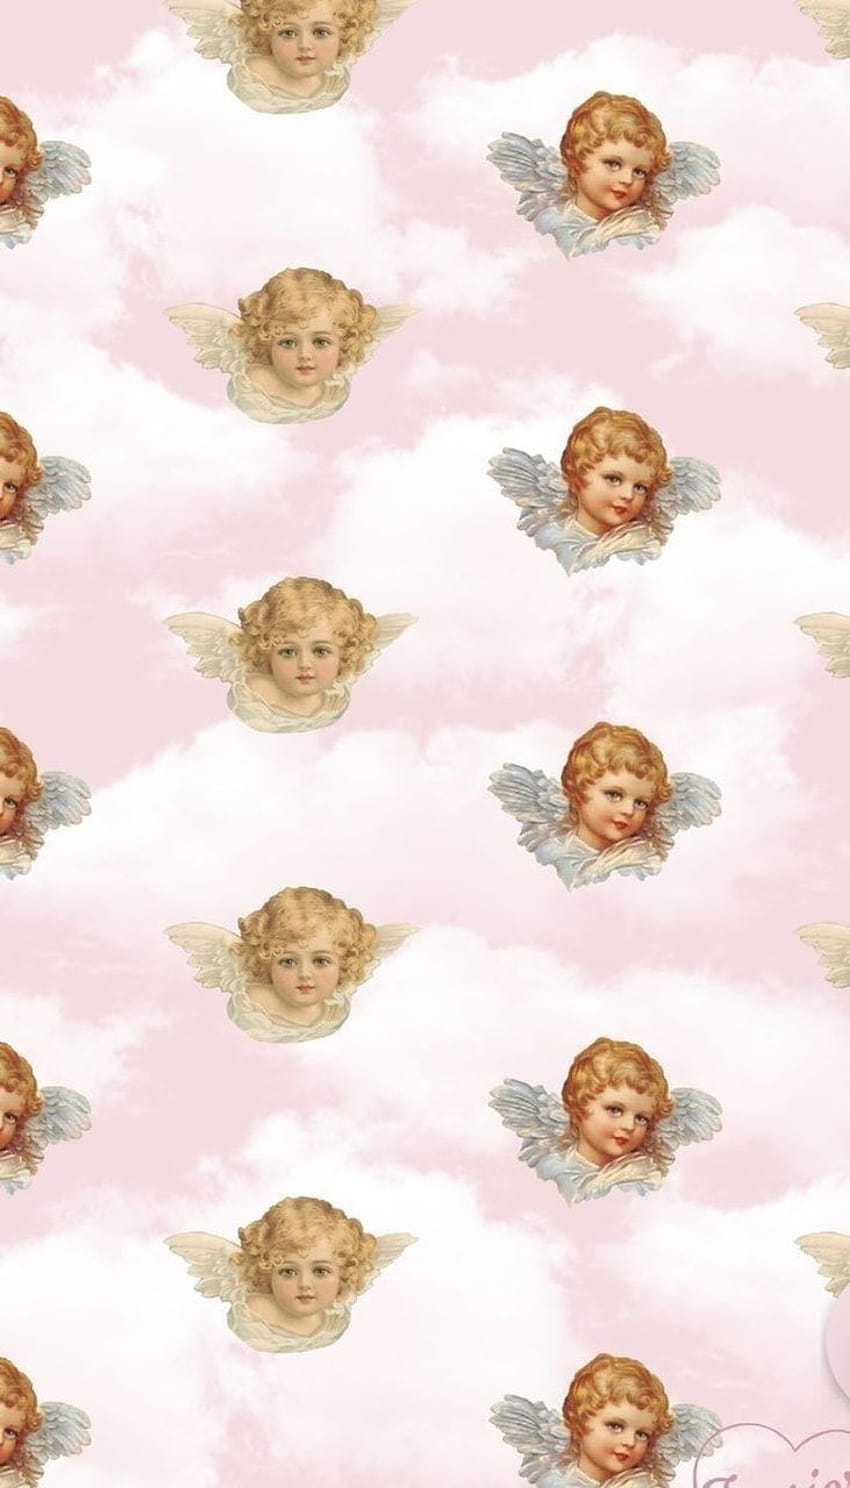 A cute pattern of angels on a pink background - Angels